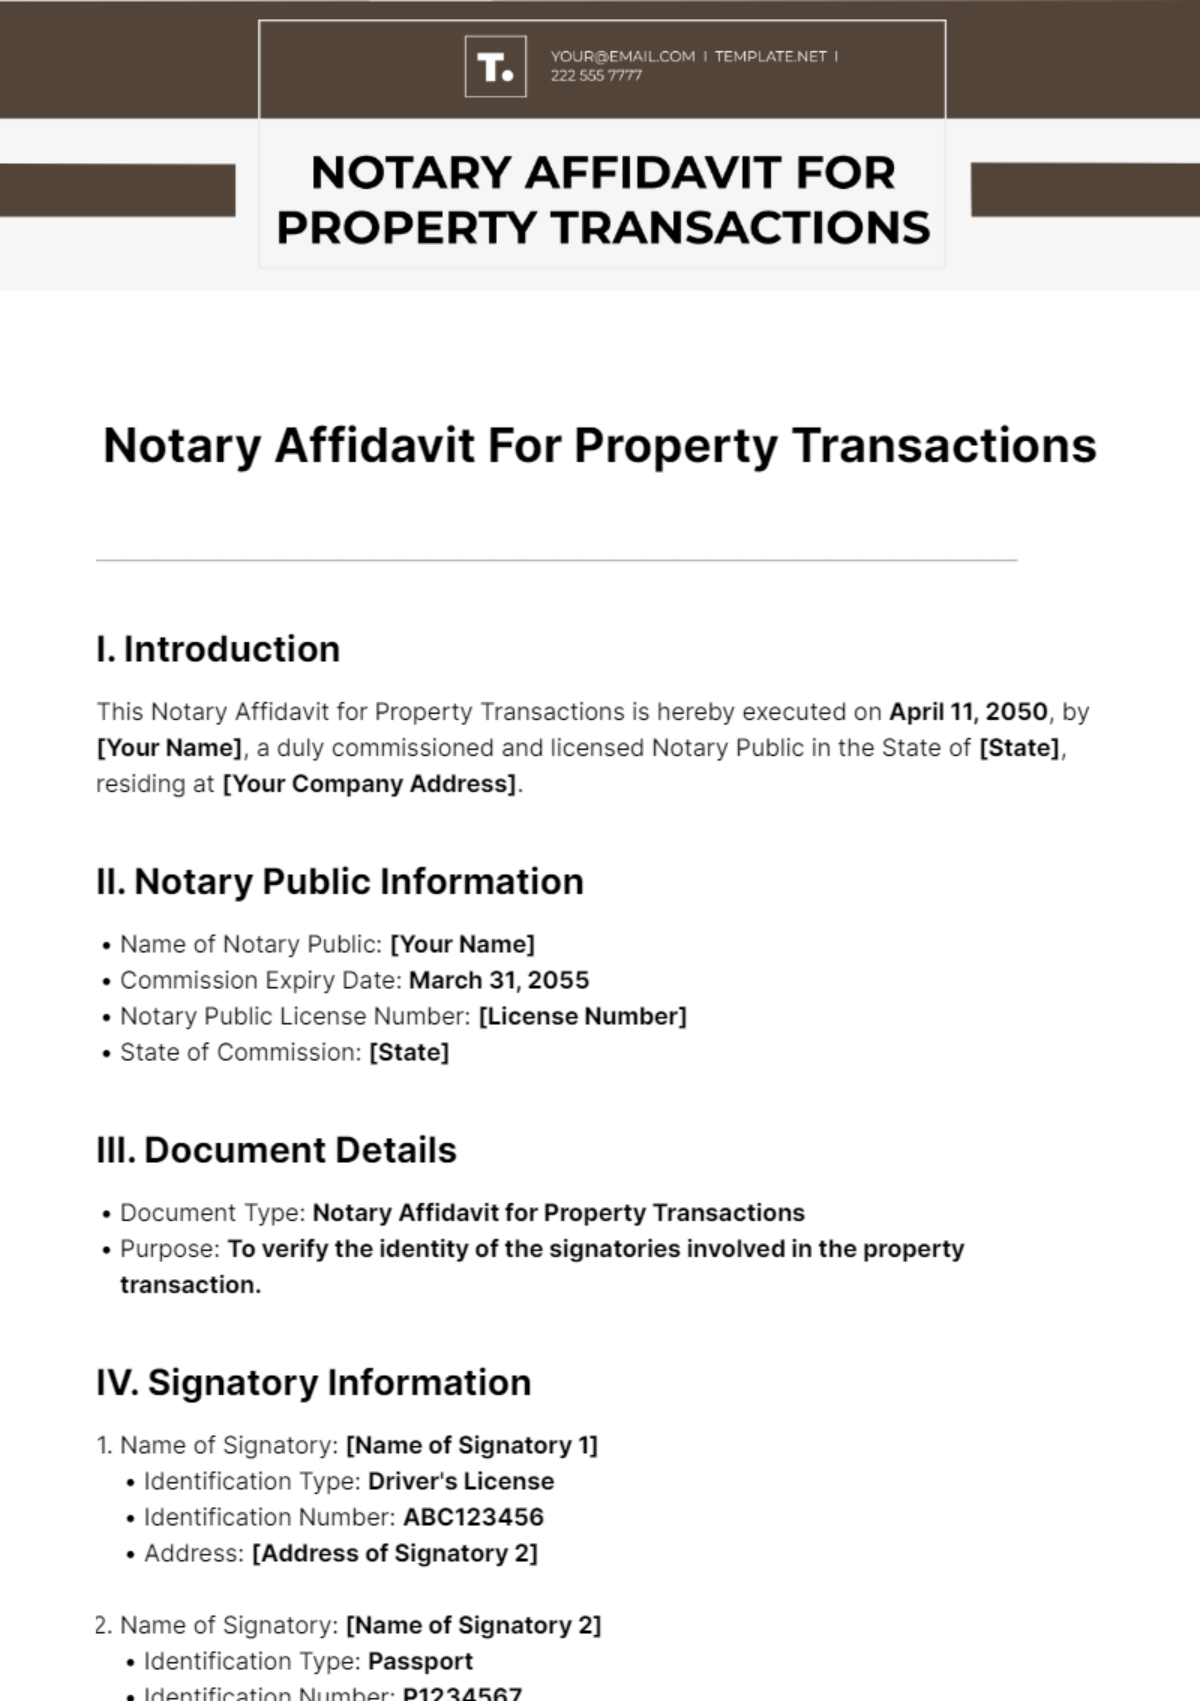 Notary Affidavit For Property Transactions Template